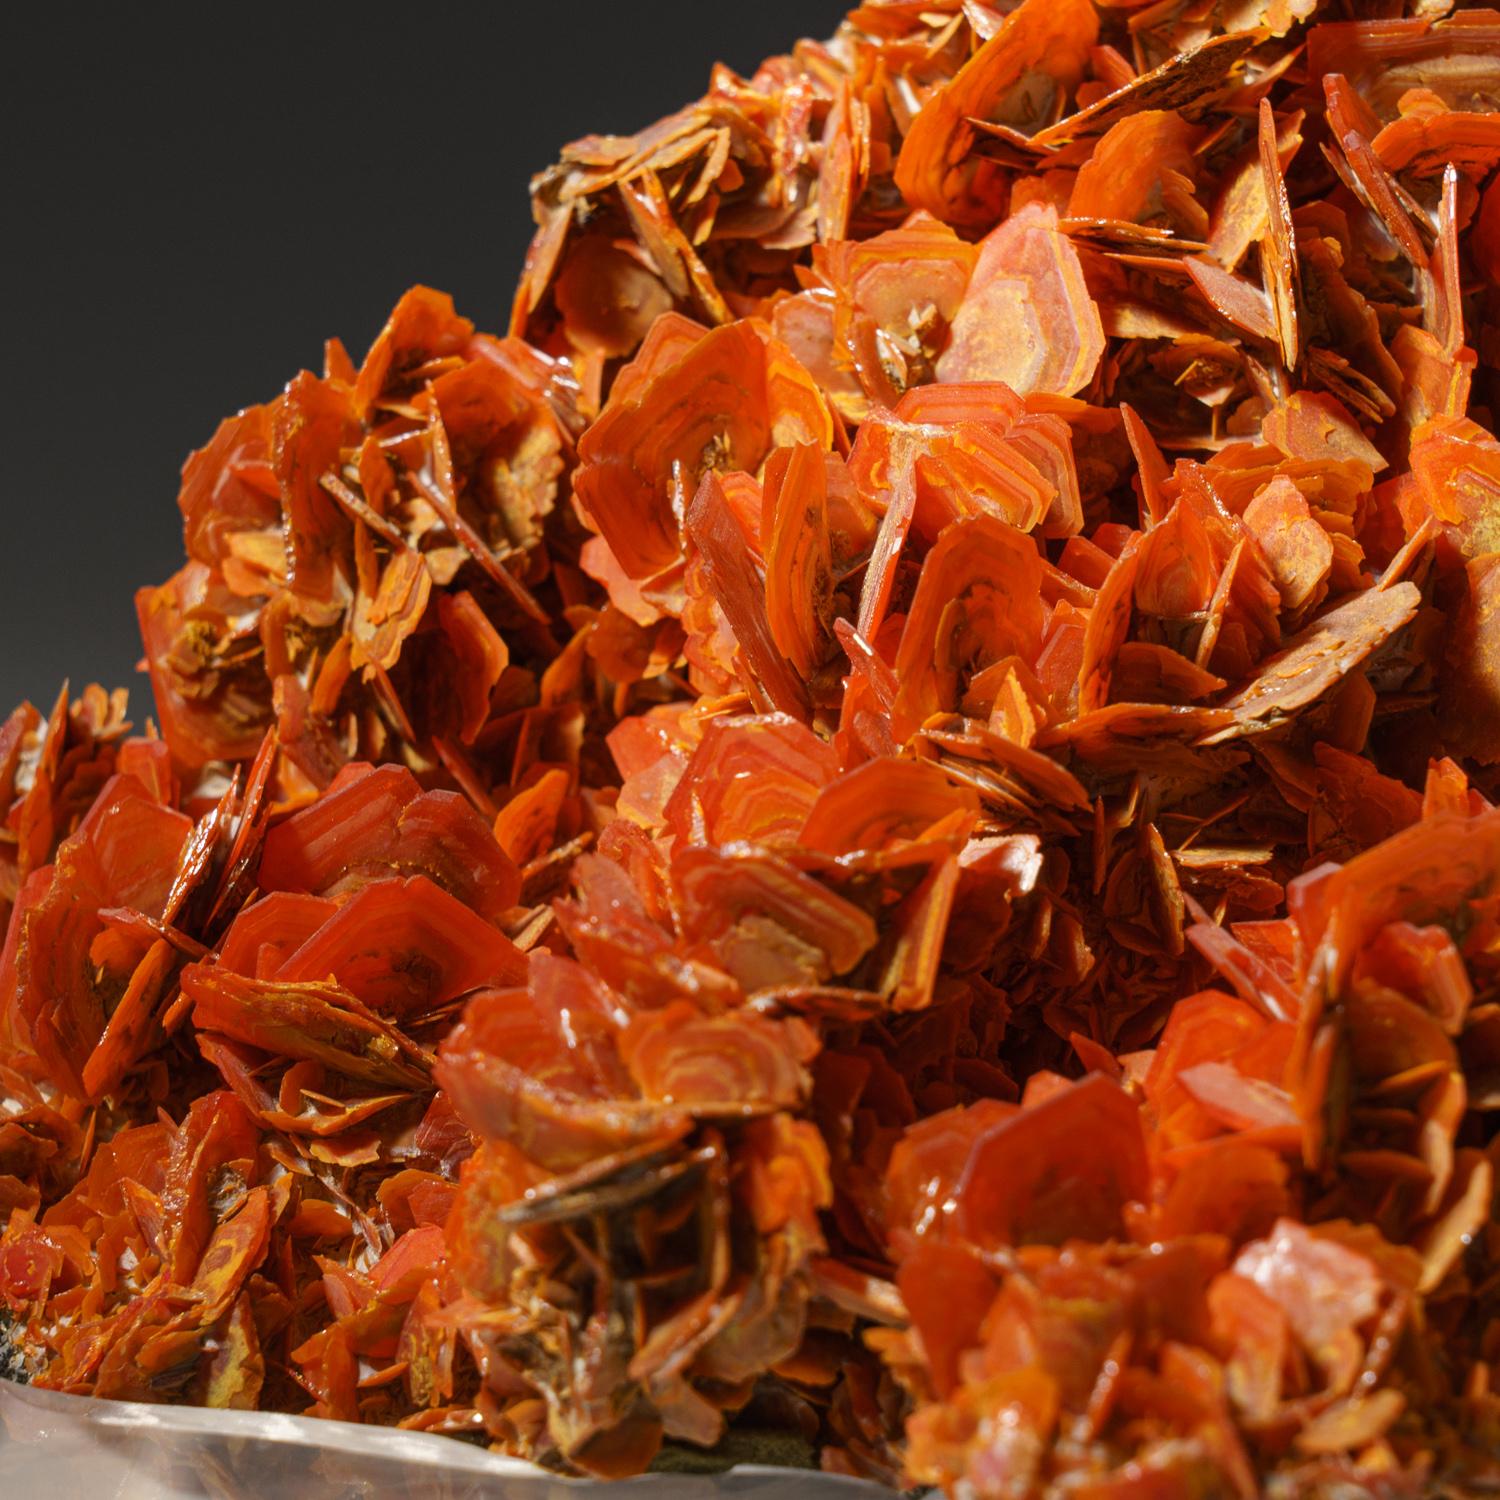 Other Wulfenite Mineral Crystal from China (1.33 lbs) For Sale